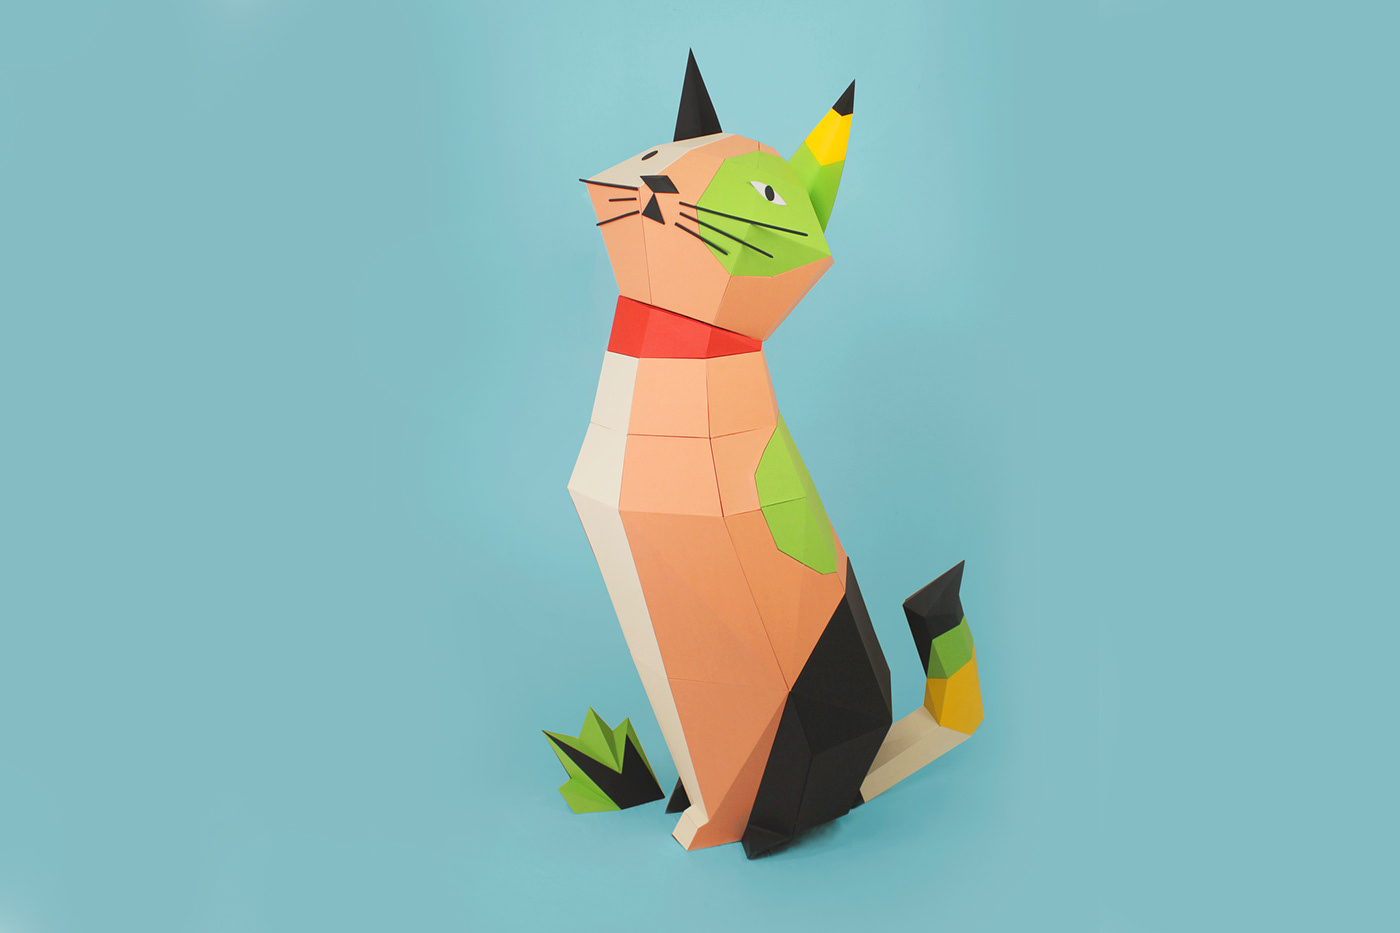 Cat cats paper craft papercut cardboard Event Design Gato colorful Low Poly 3D